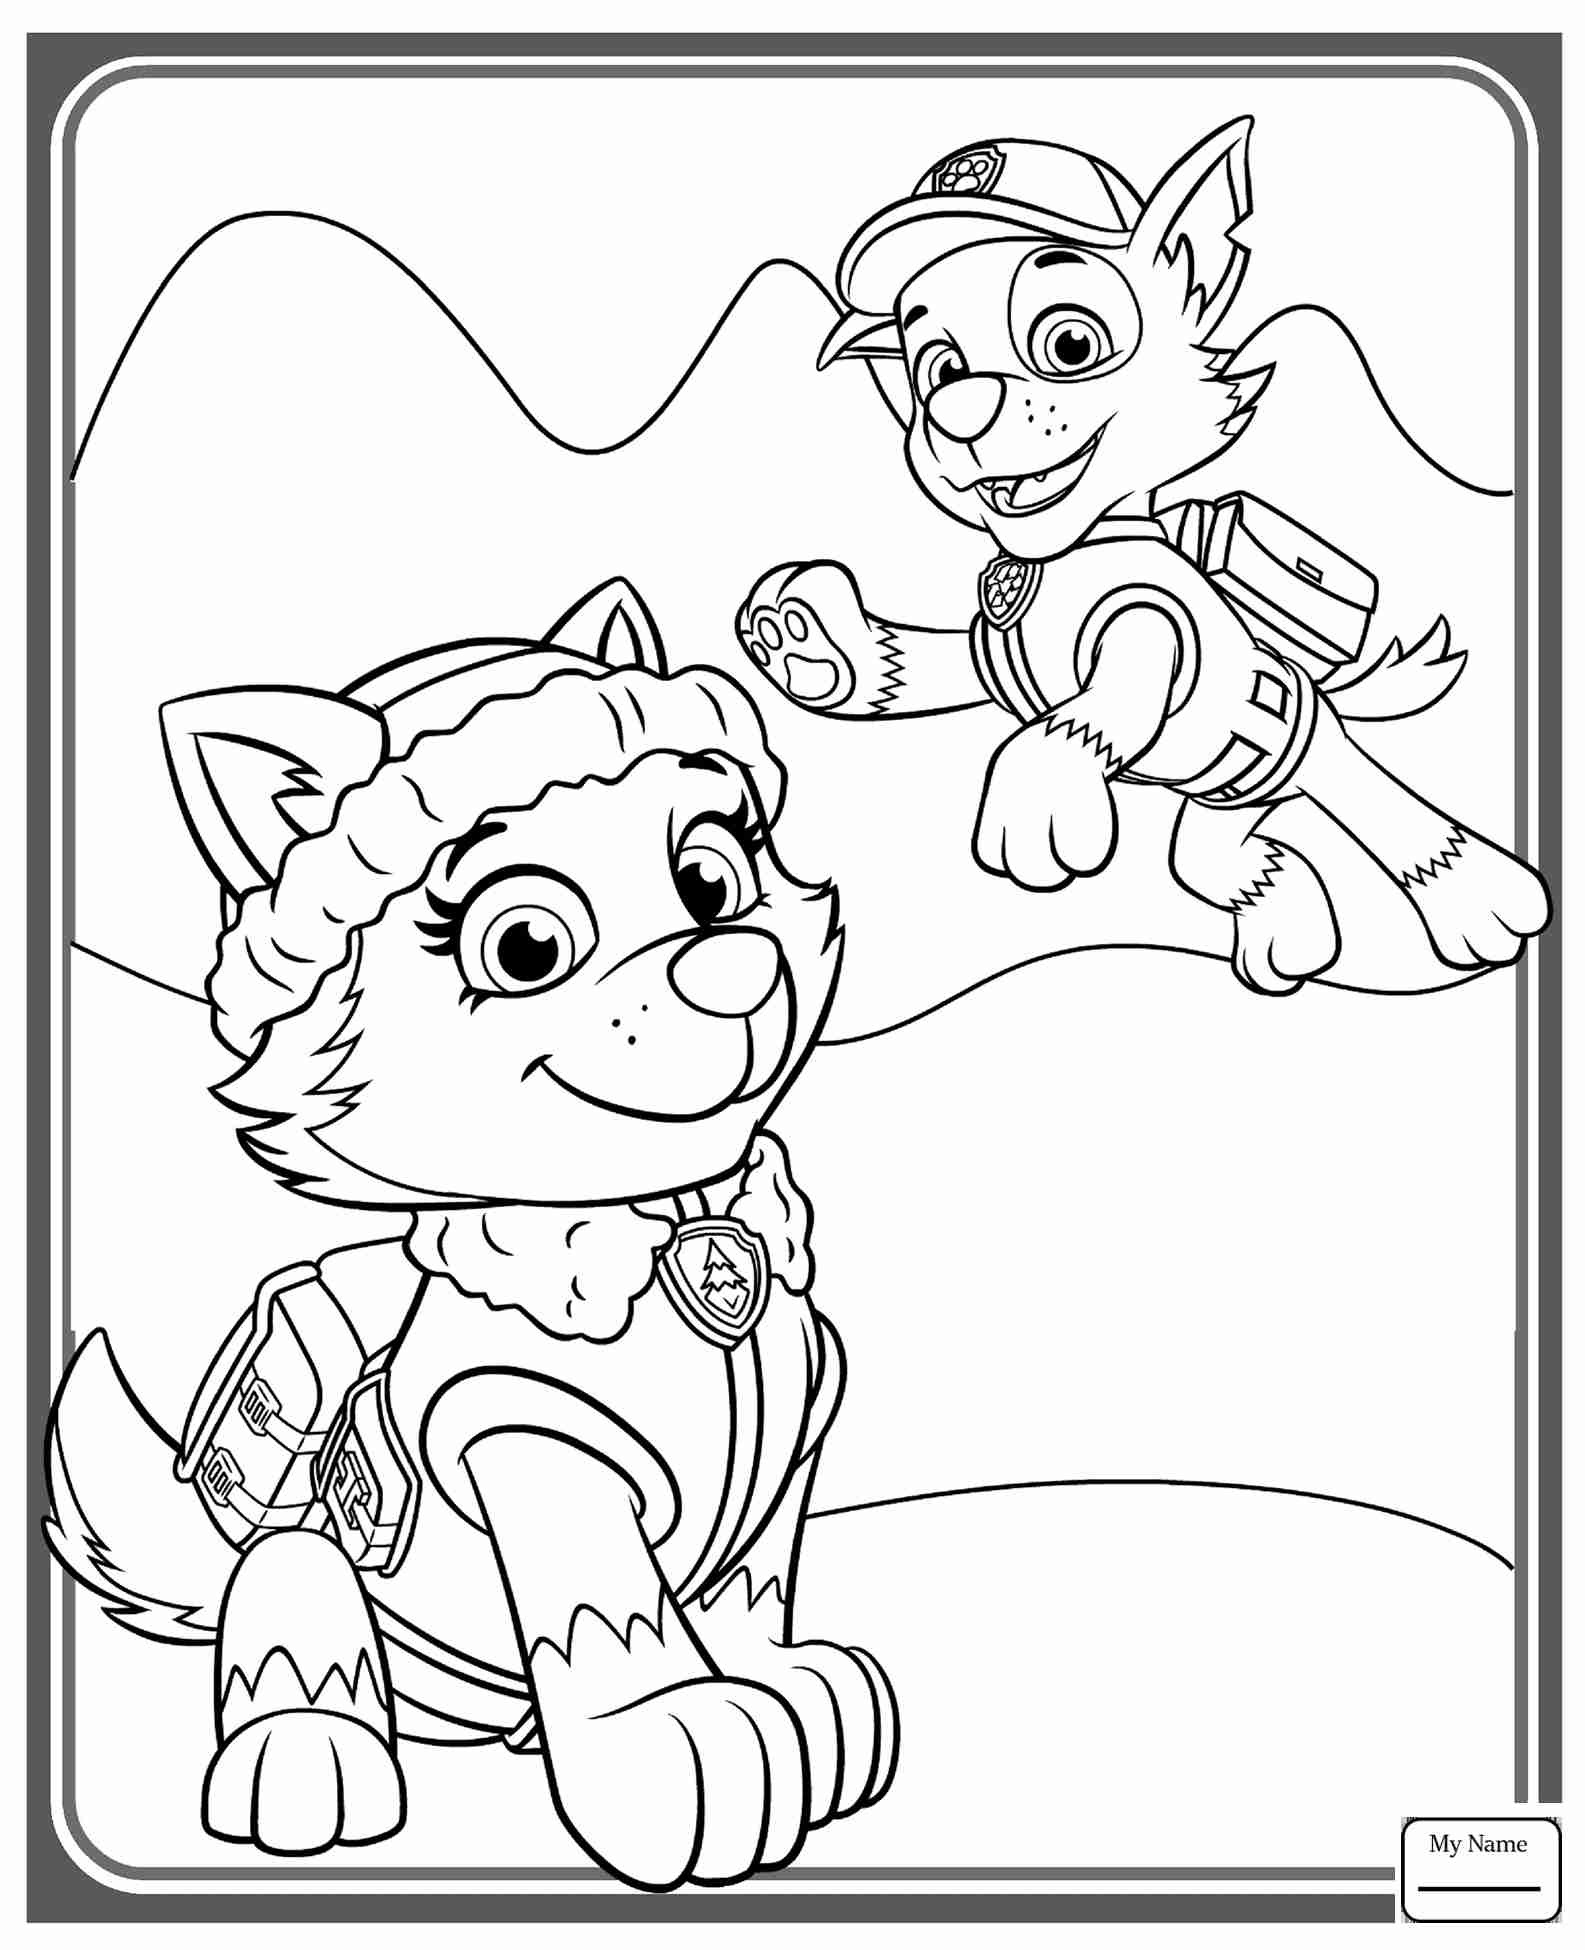 Skye Paw Patrol Coloring Pages at Free printable colorings pages to print and